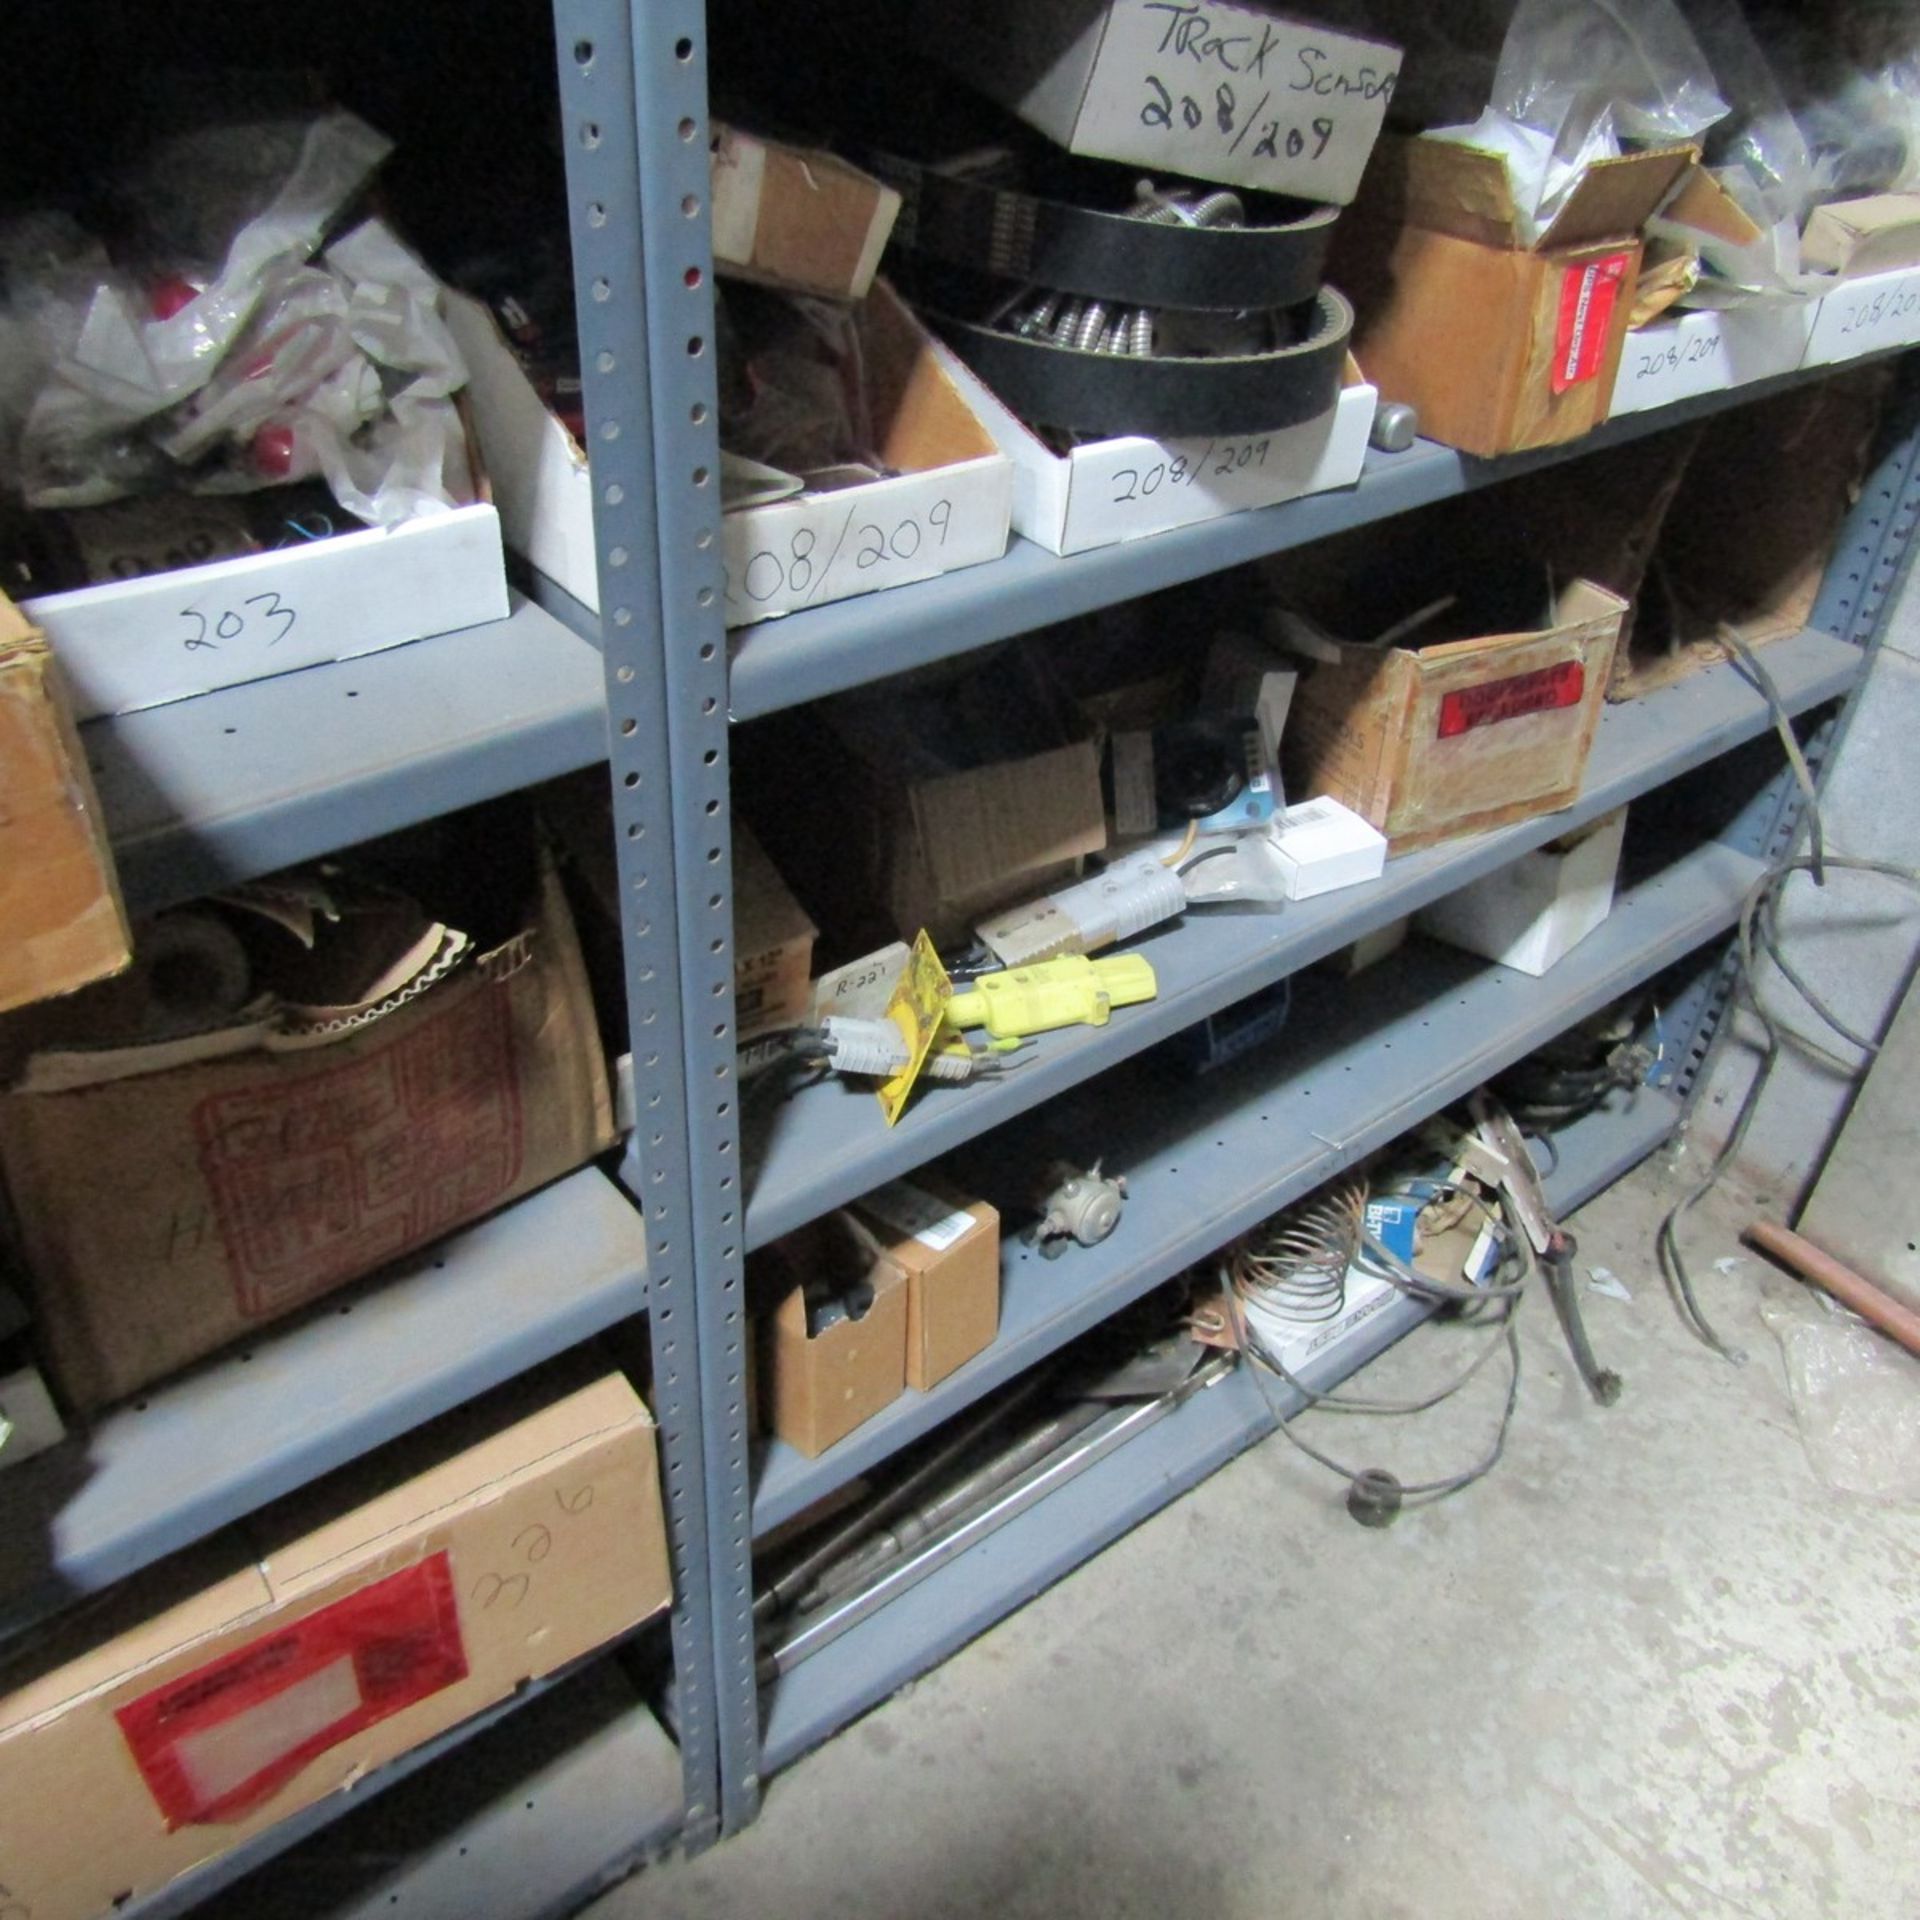 Shelving Units with Contents to Include 74" x 48", Pumps, Connectors, Plugs, Oil Filters, Fittings - Image 15 of 15